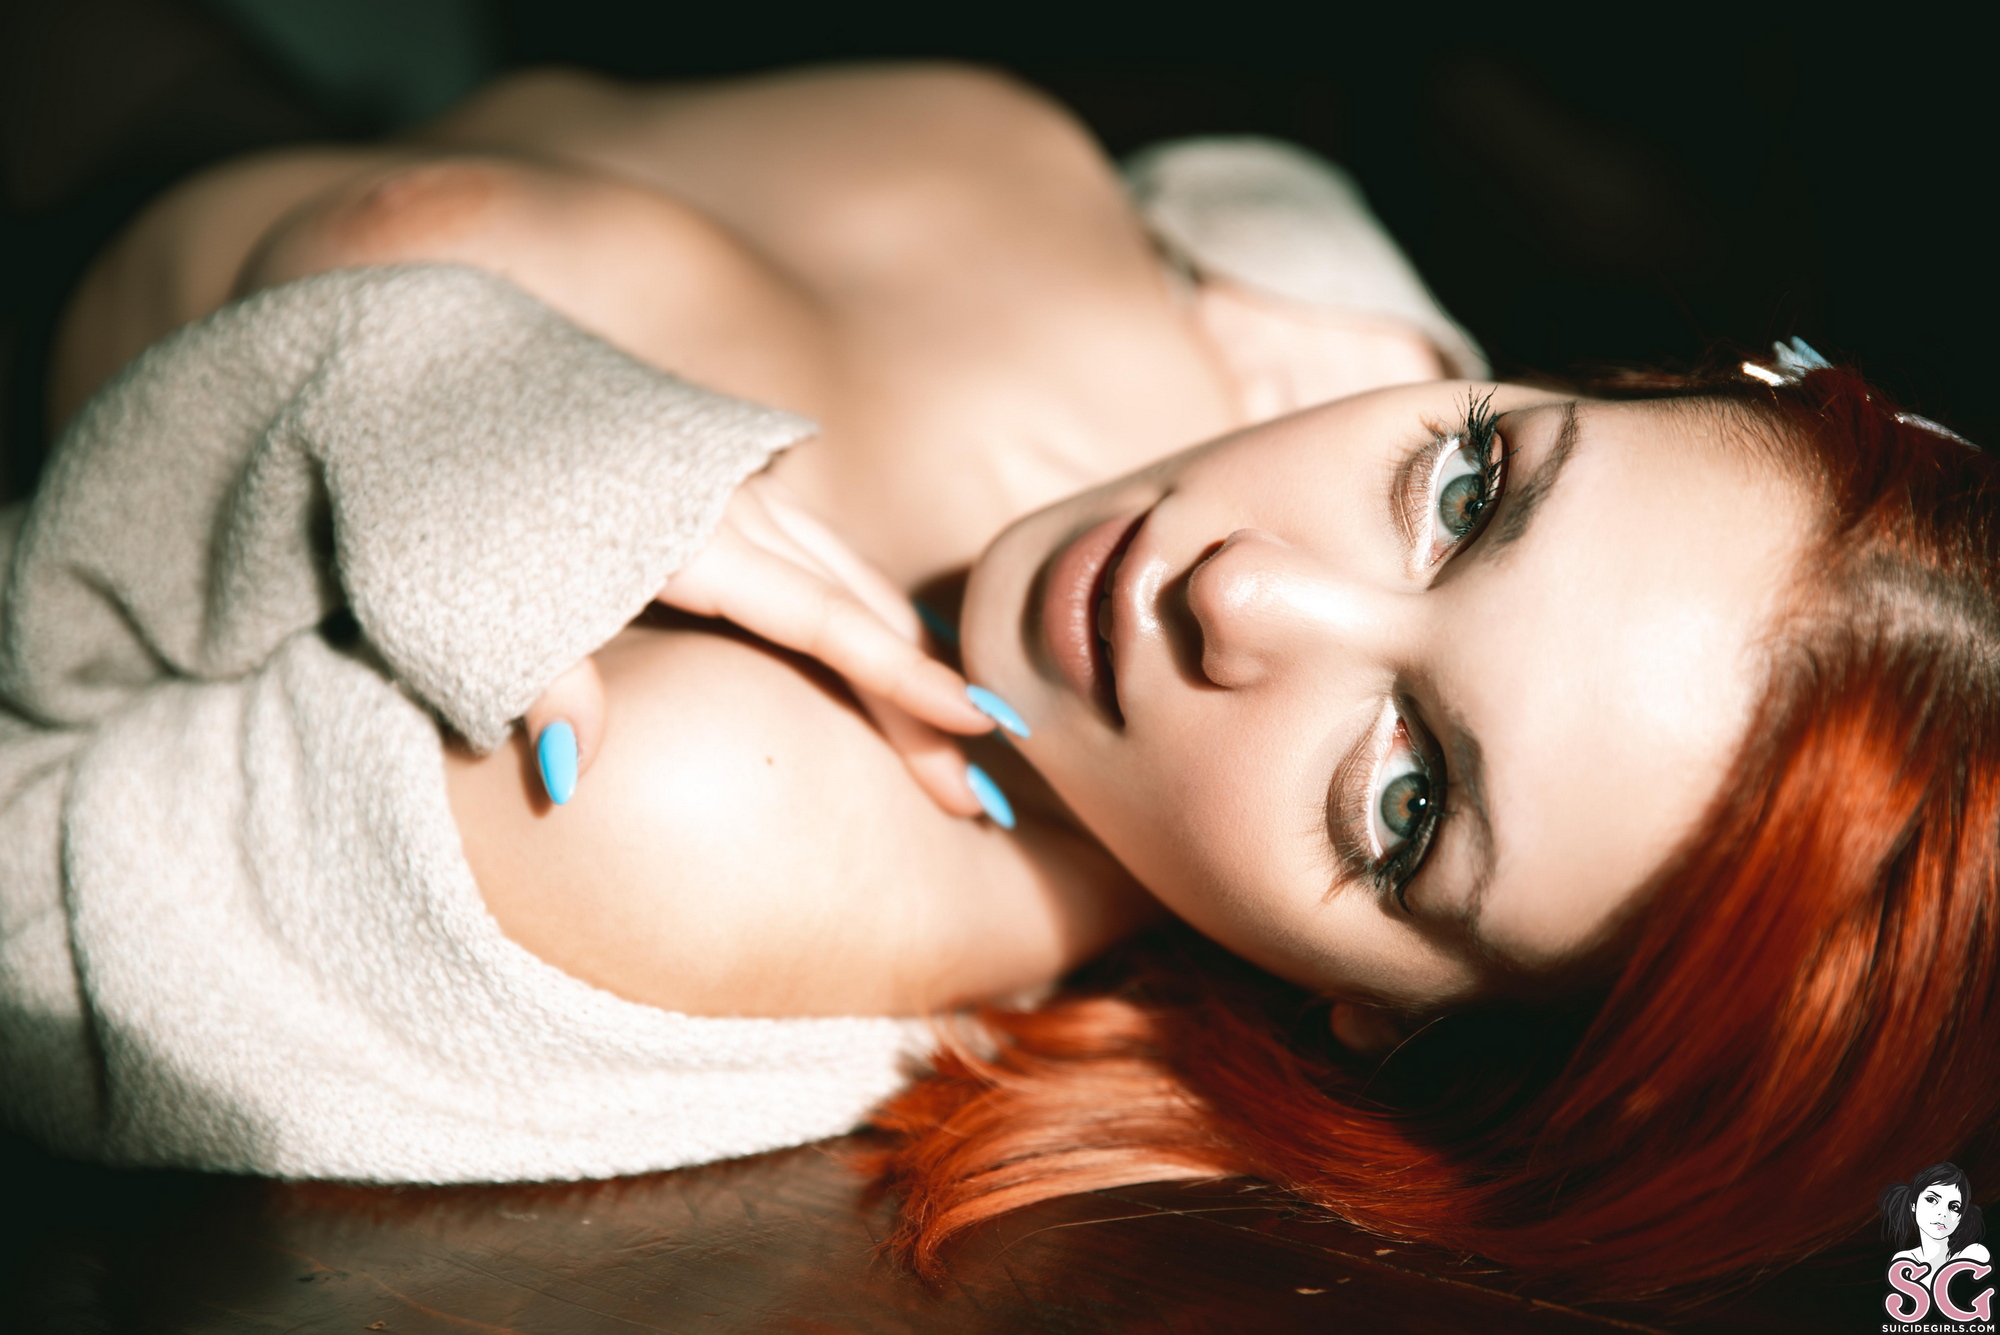 valy-soft-and-wooden-nude-tights-redhead-tits-suicidegirls-14